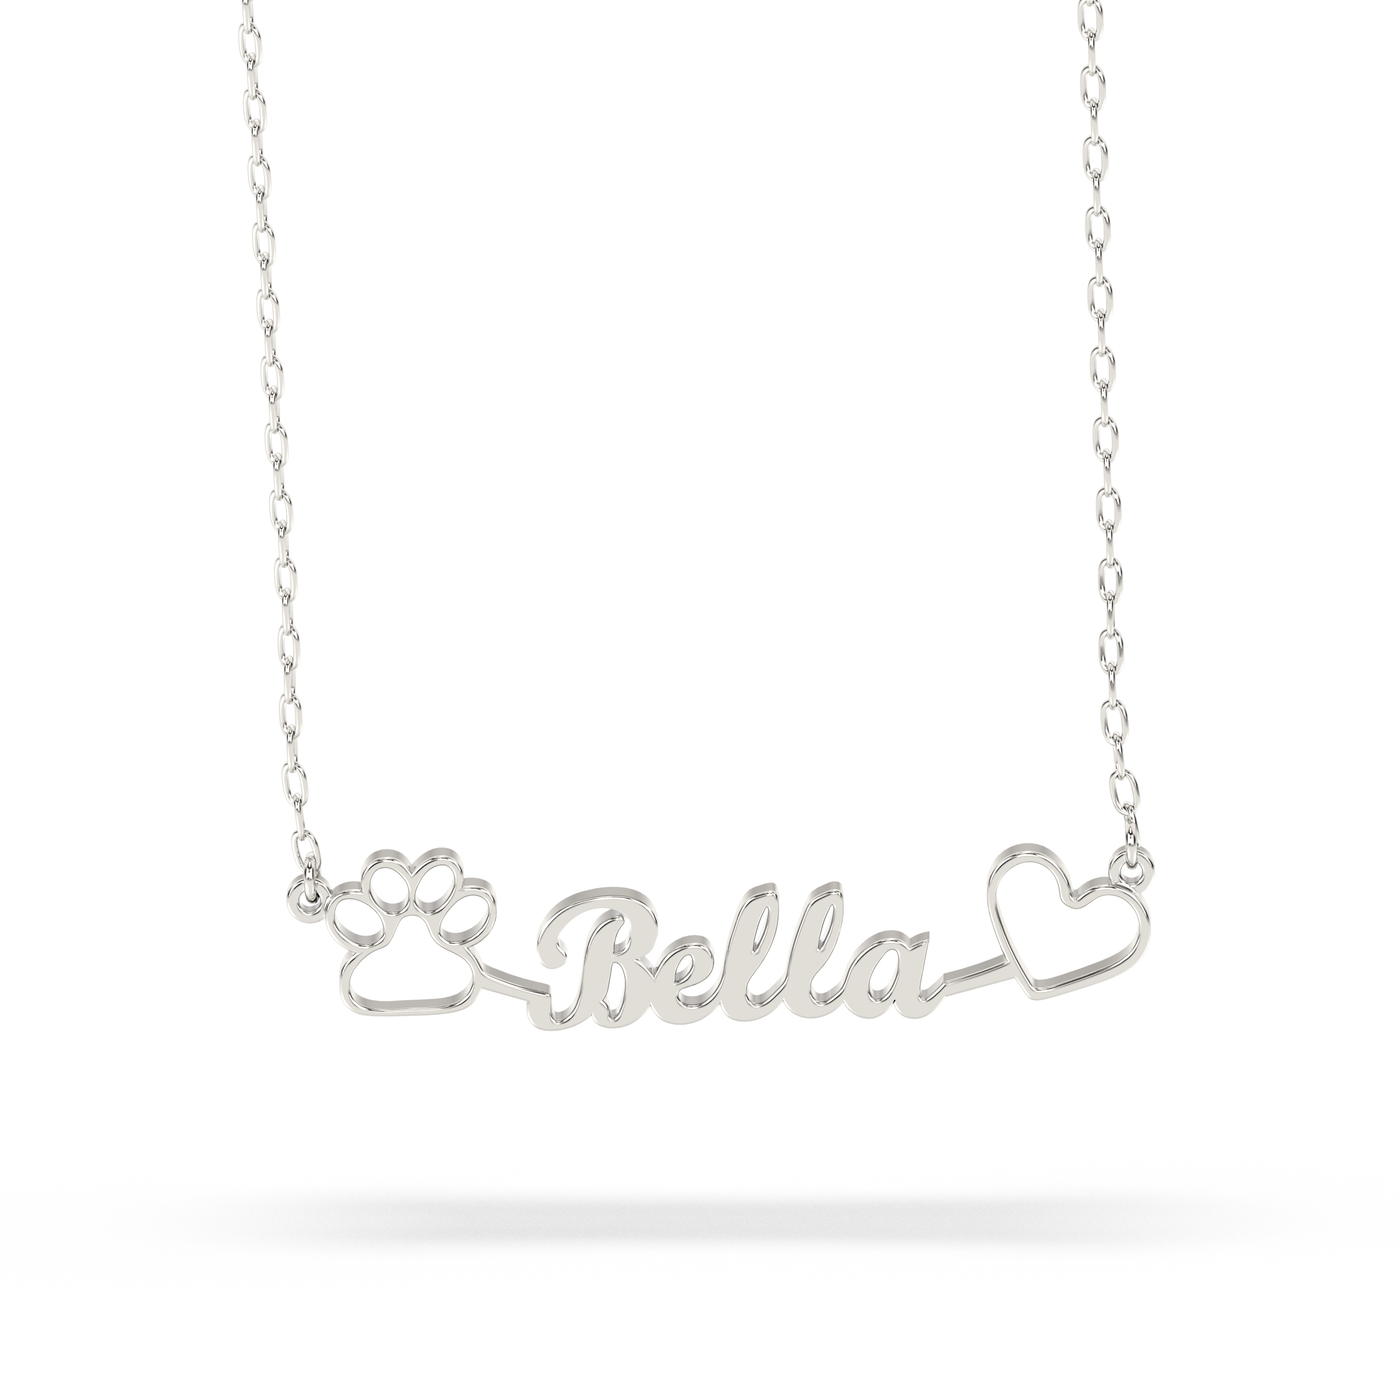 Personalized Veterinarian Necklace